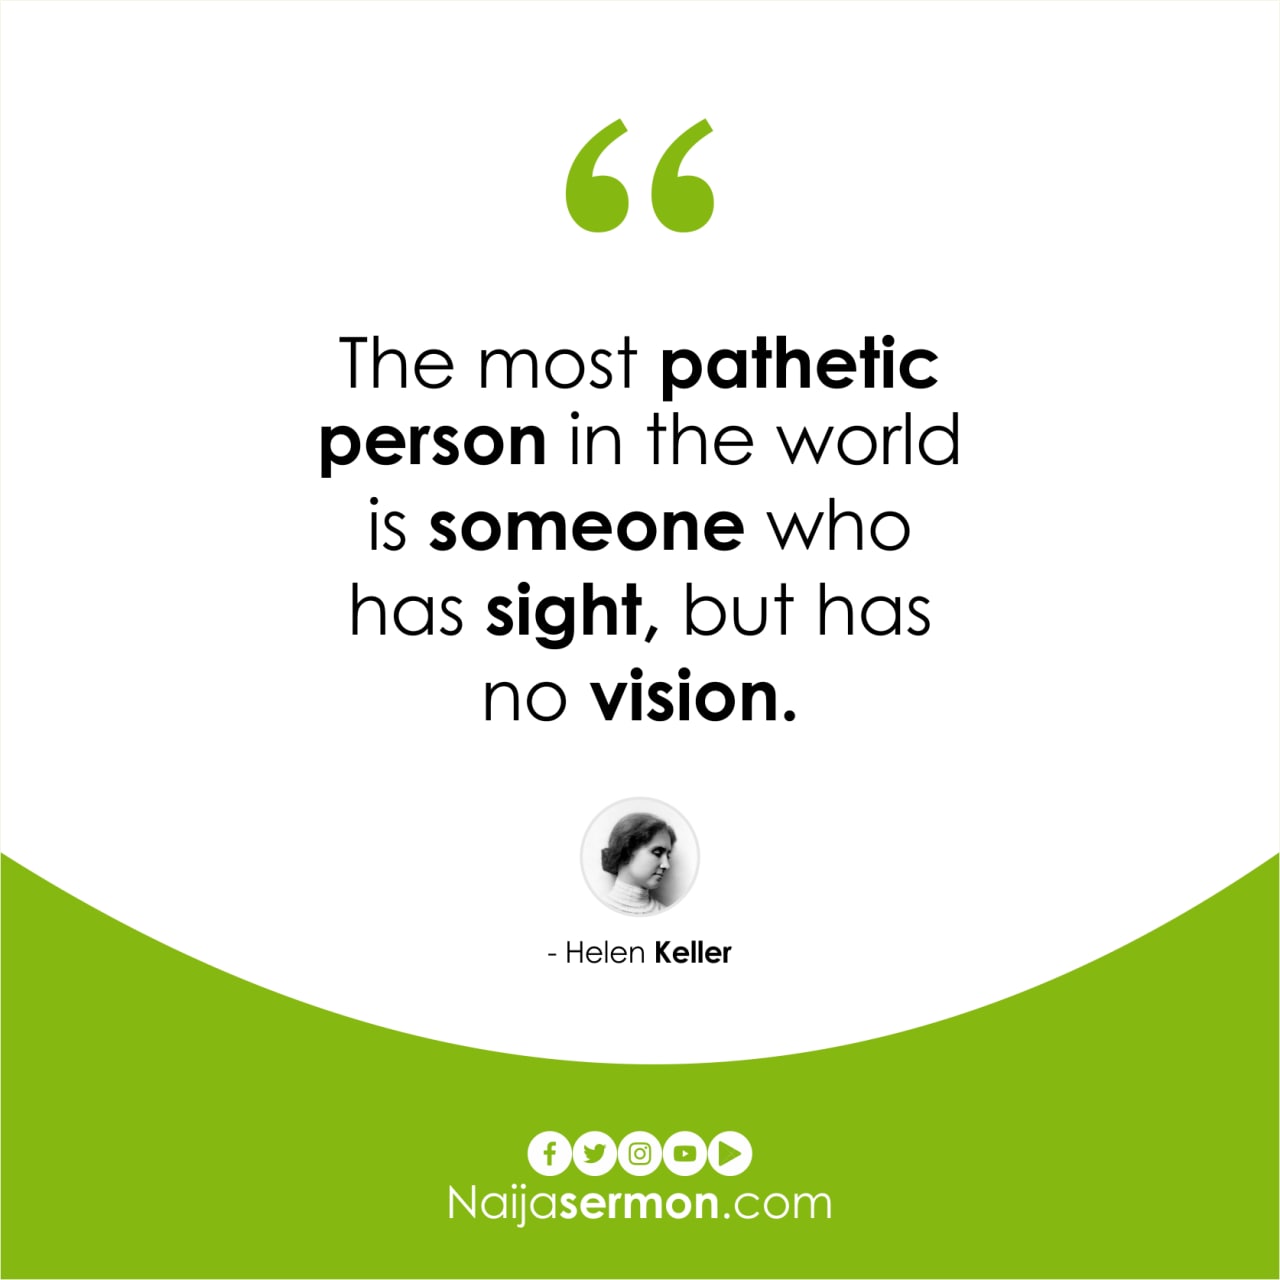 QUOTE OF THE DAY BY HELEN KELLER 4